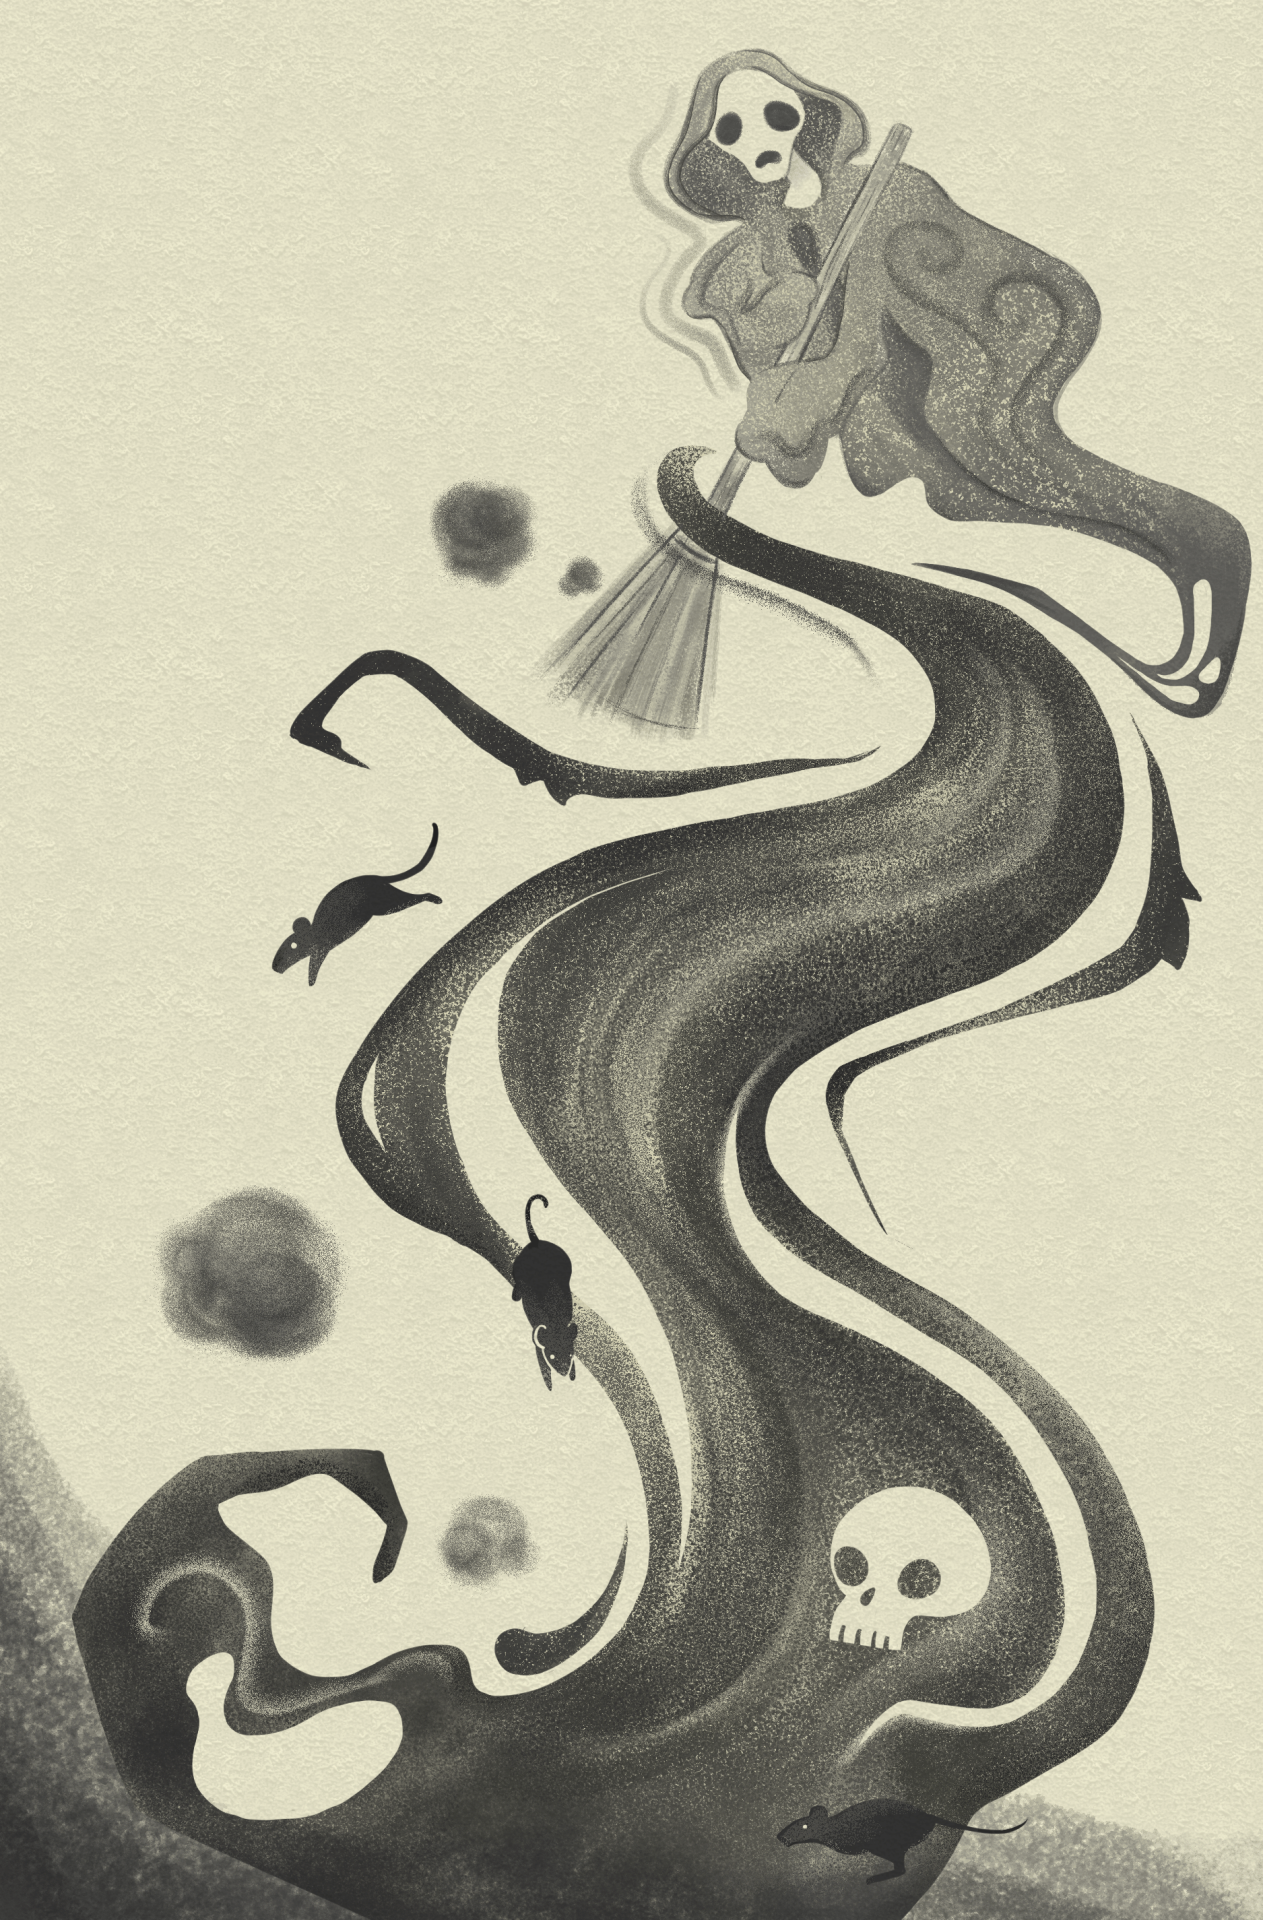 Image of a floating, hooded, ghostly character with a broom; sweeping a cloud of black dust down the page. The dust cloud has a shape of a skull within it, and three rats are jumping from the cloud.